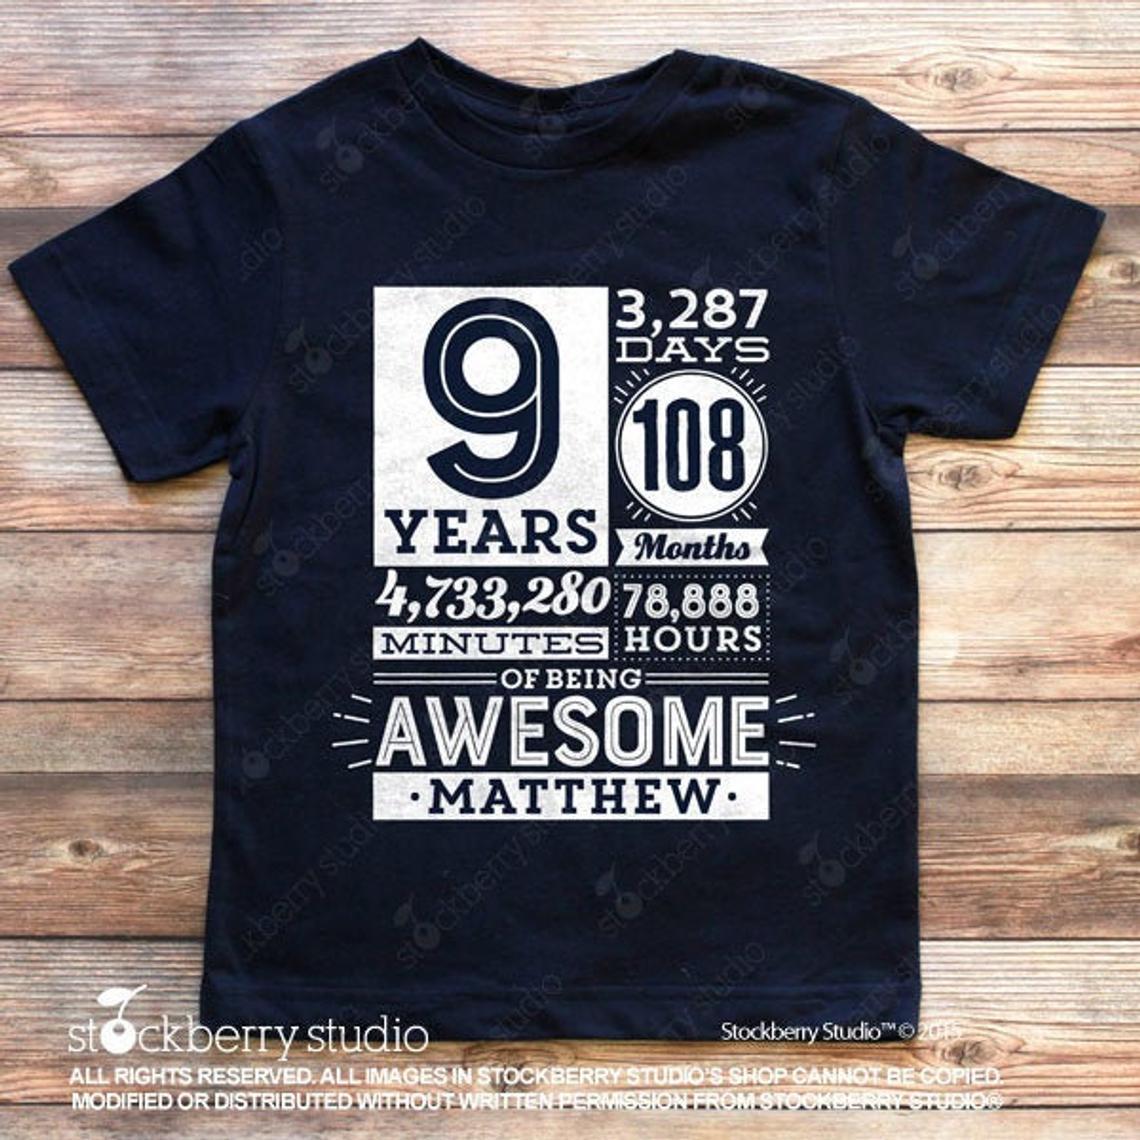 9 Years of Being Awesome Birthday Shirt (any age) - Stockberry Studio